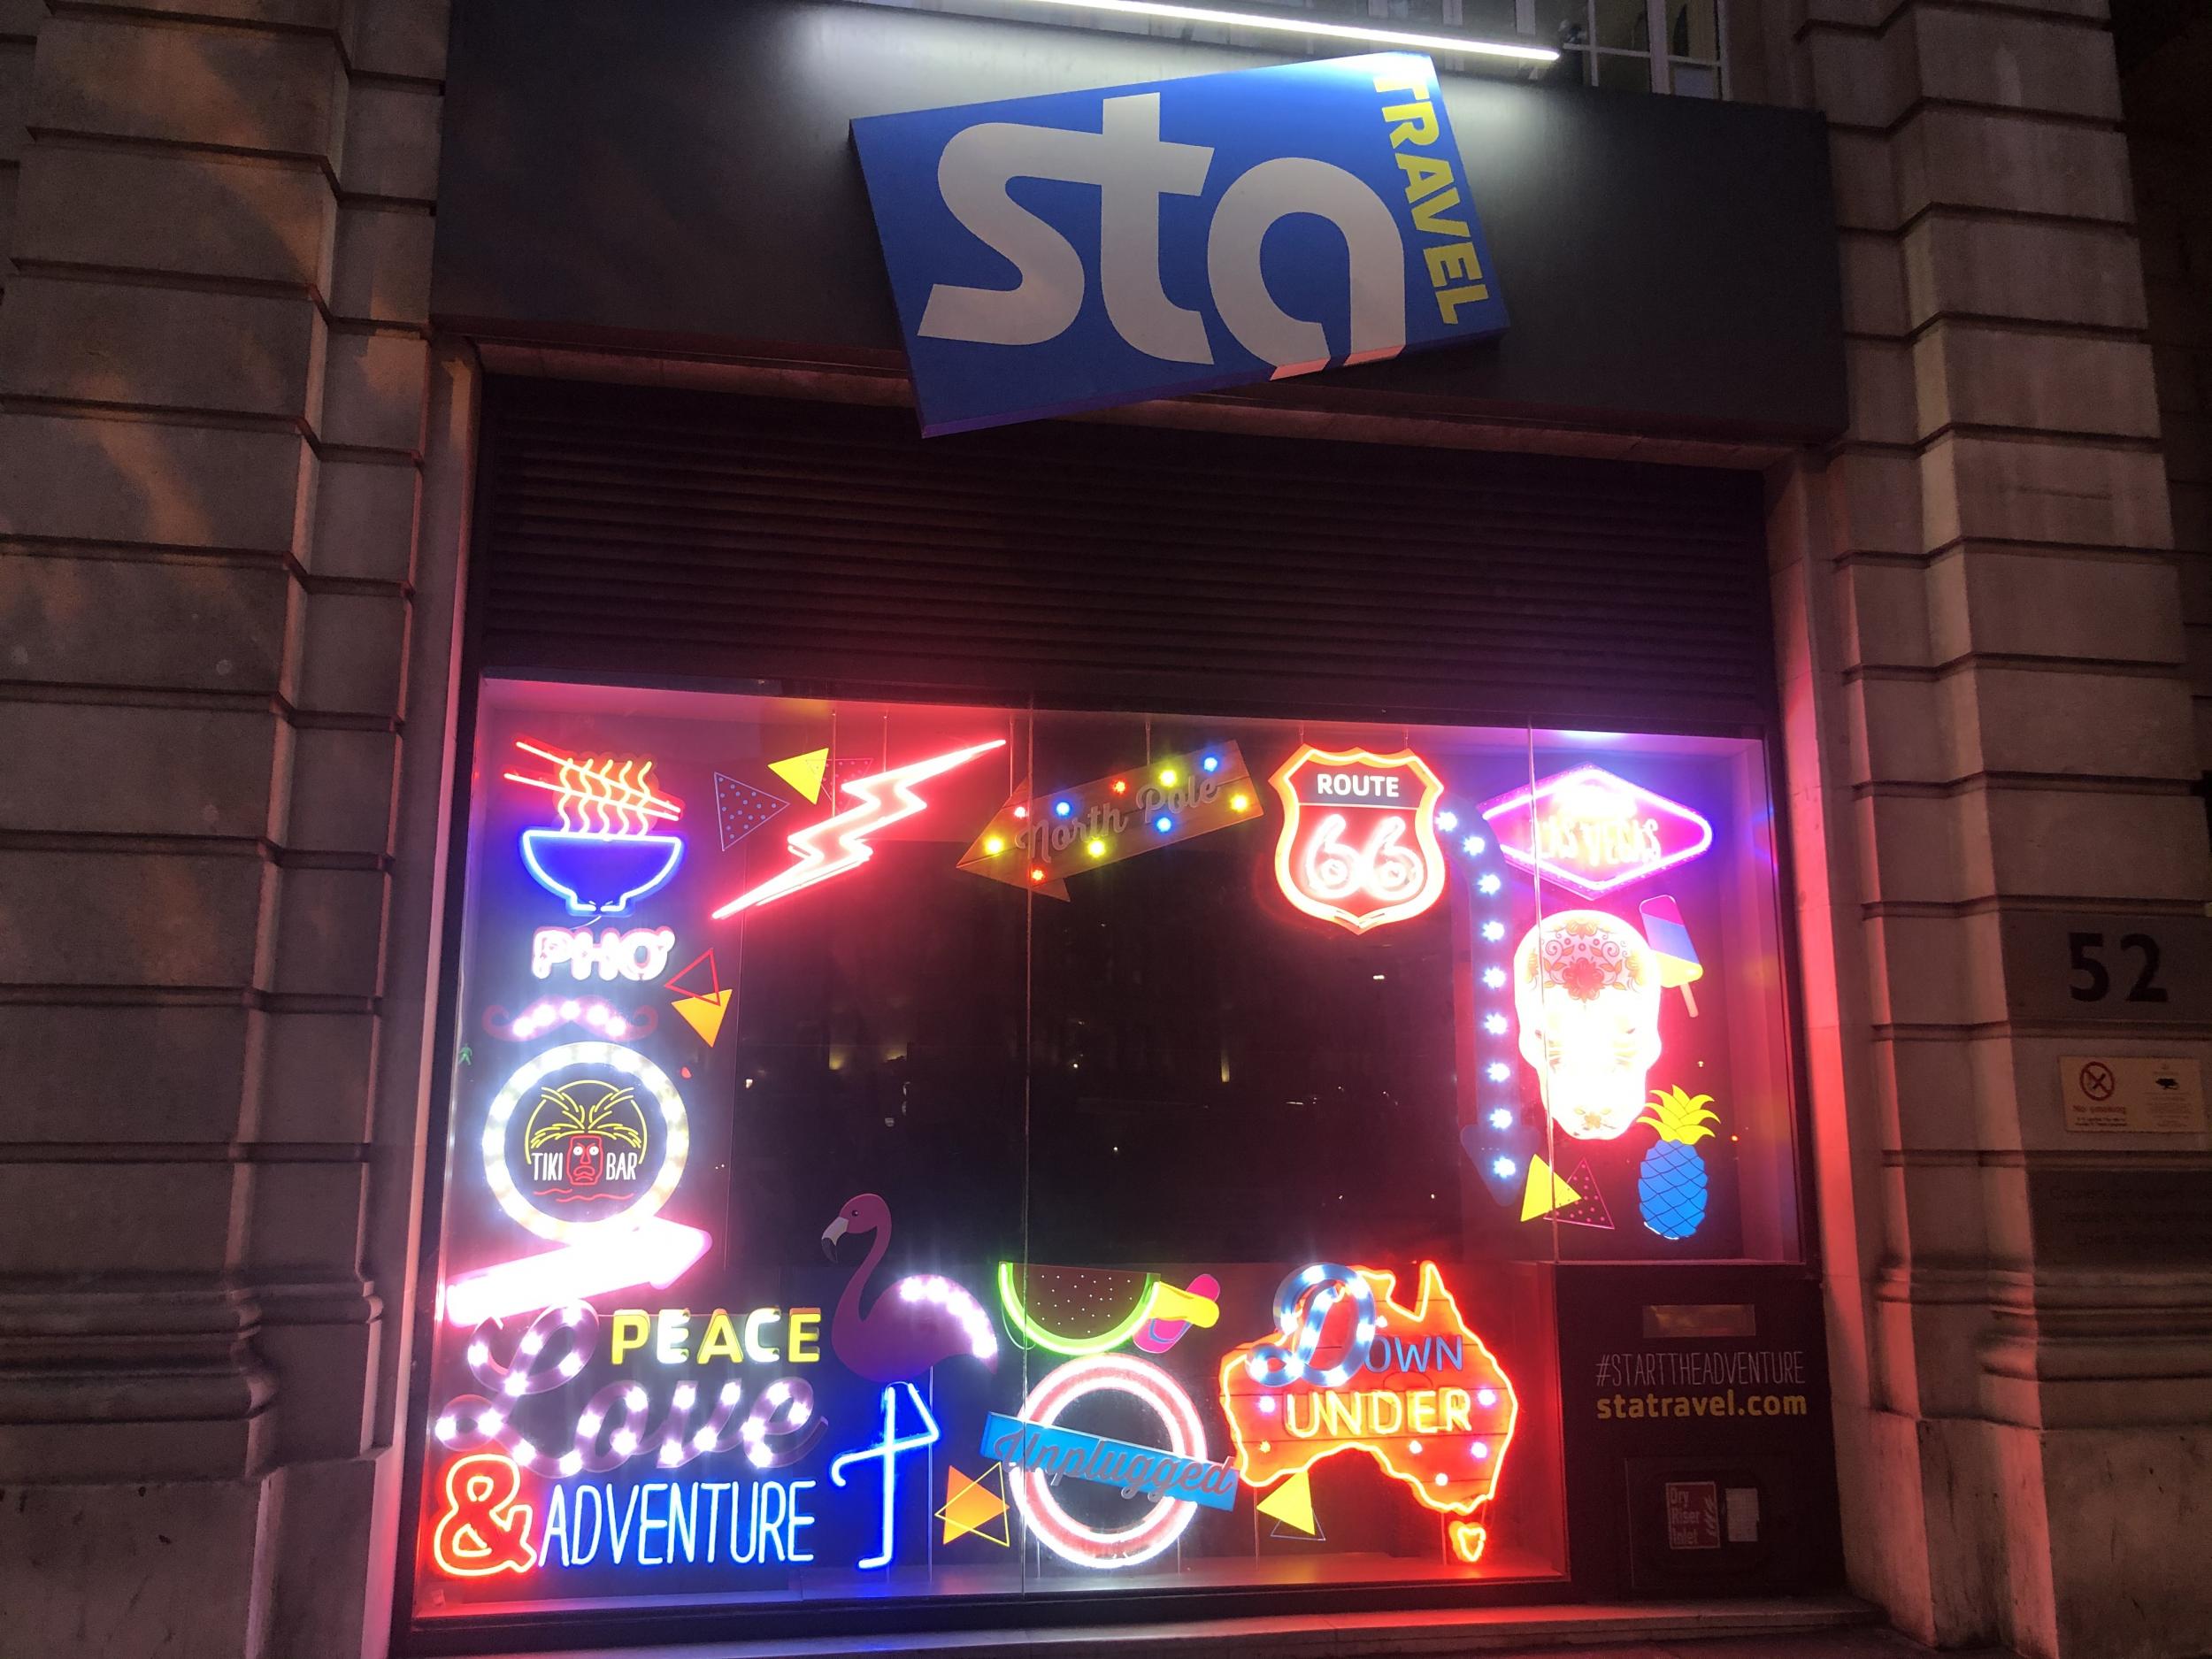 Distant dreams: the STA Travel head office in central London